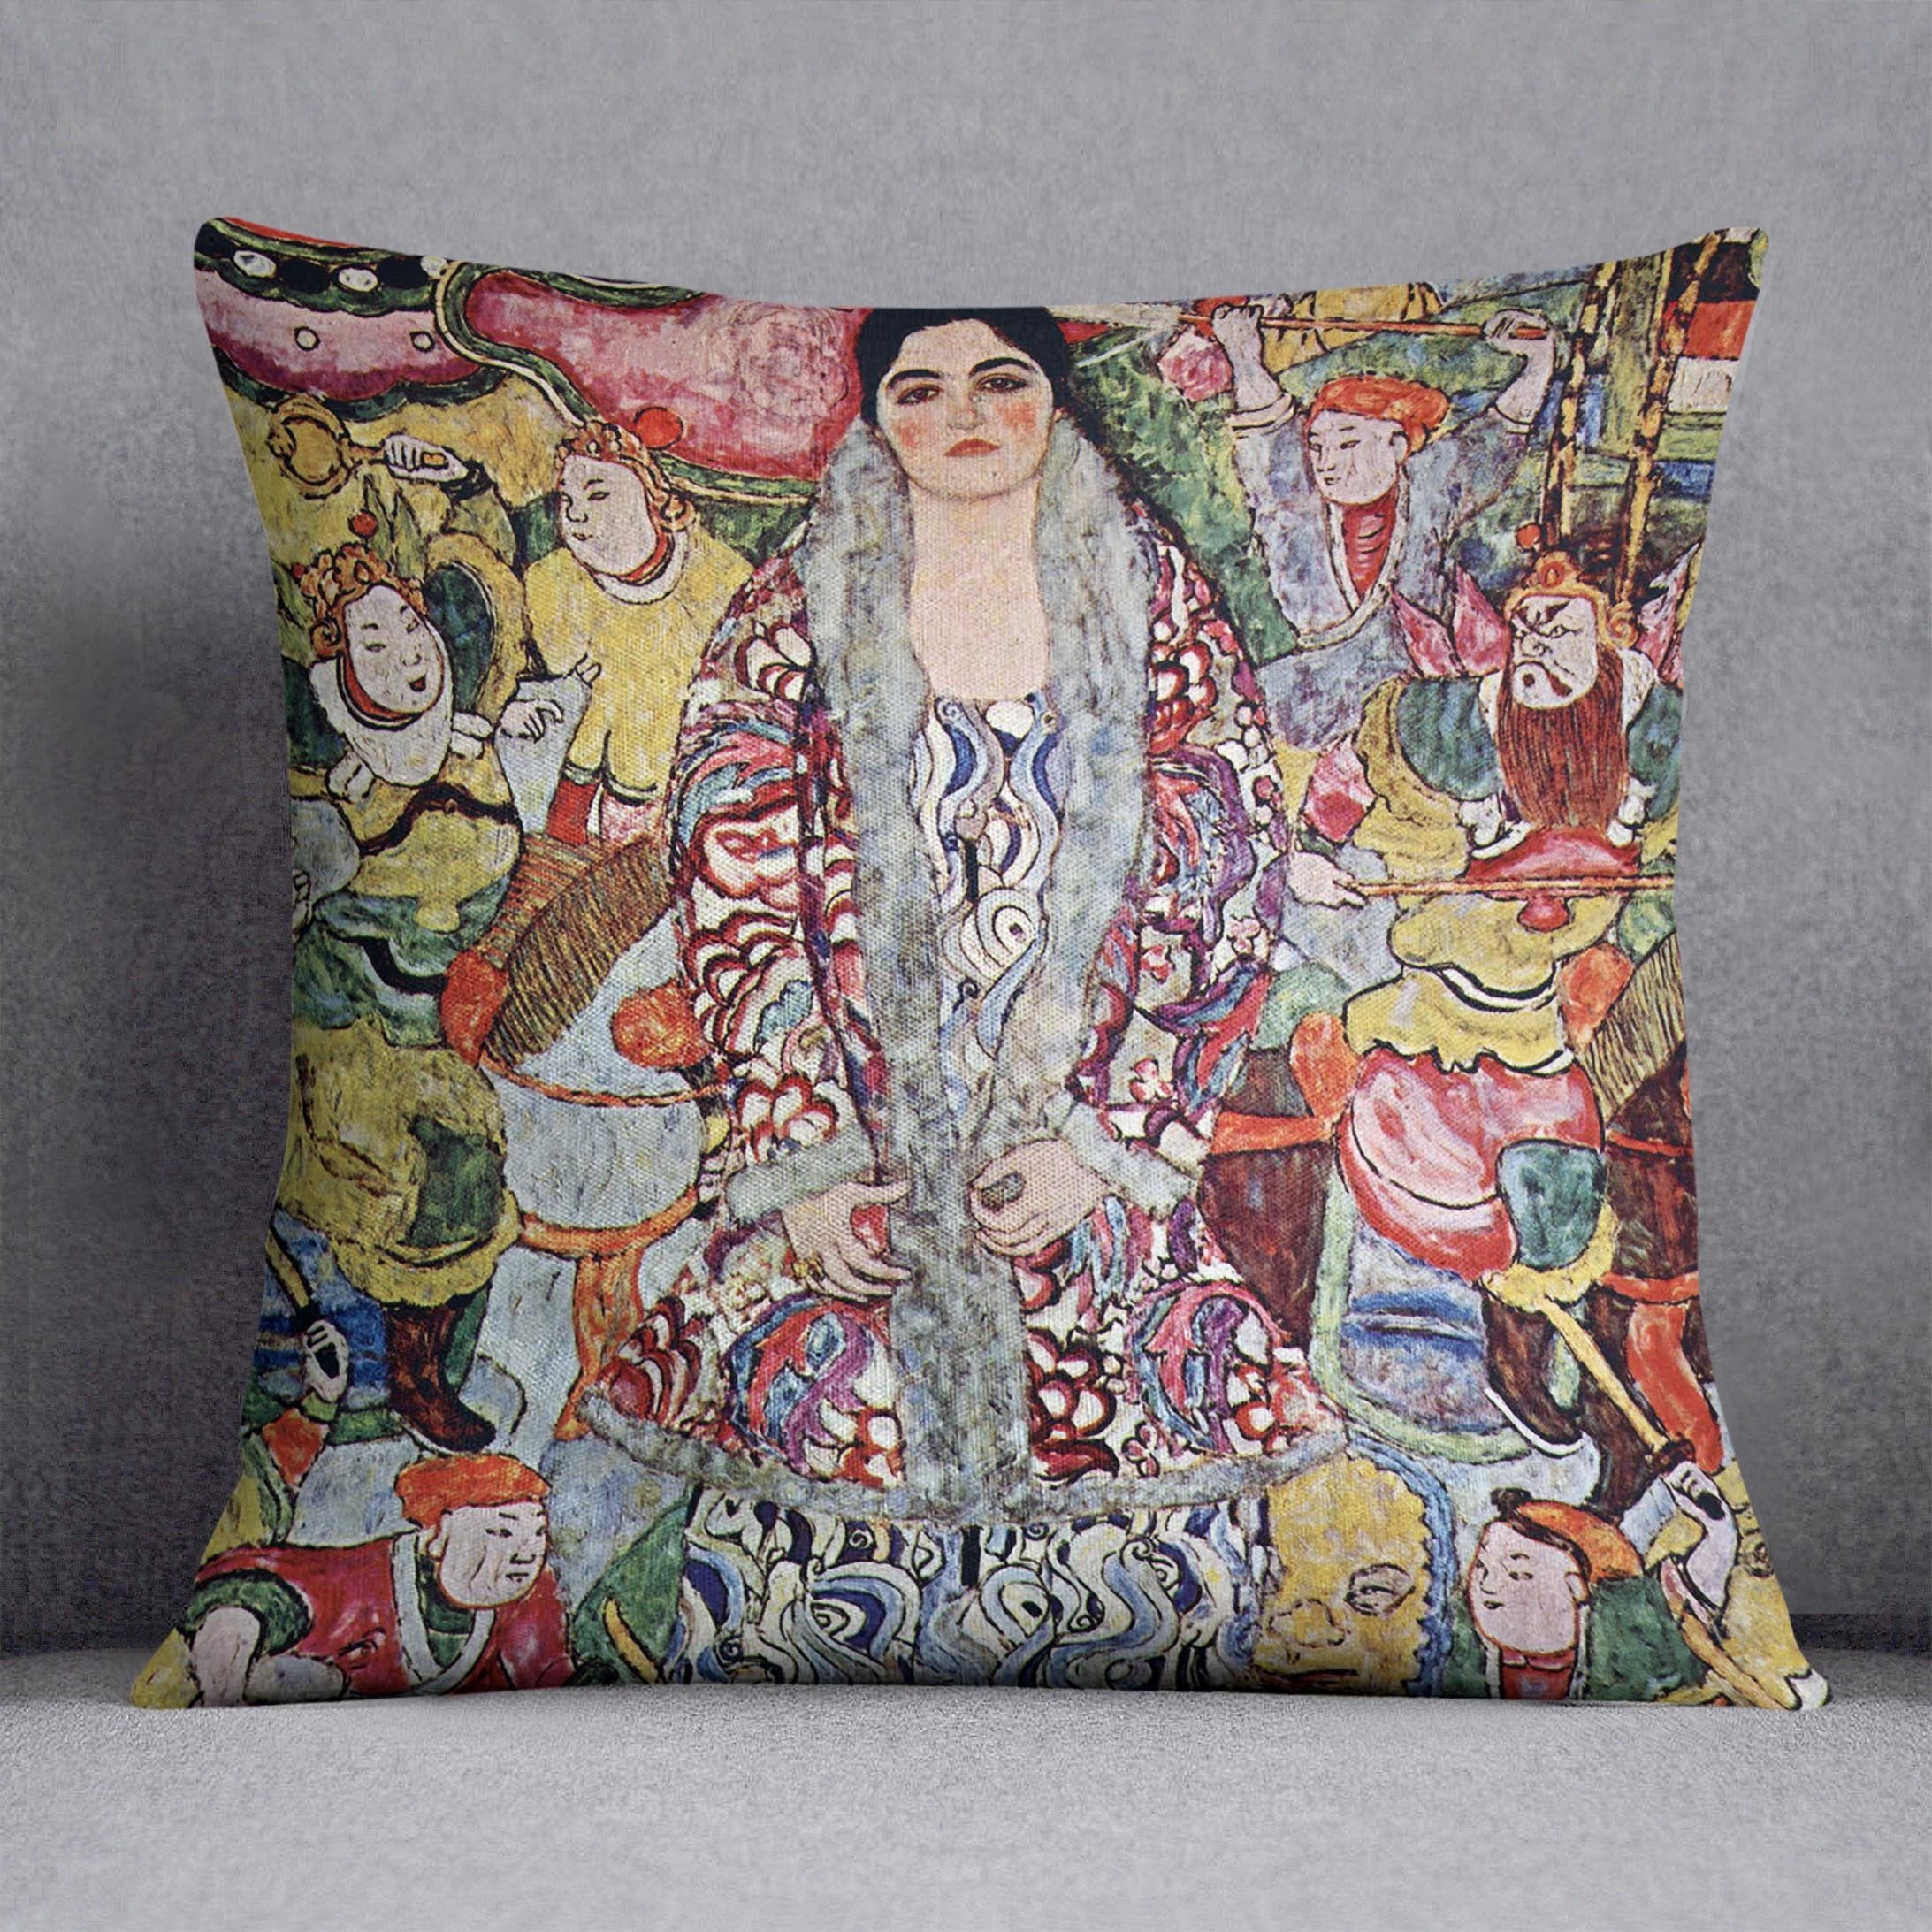 Portrait of Frederika Maria Beer by Klimt Throw Pillow